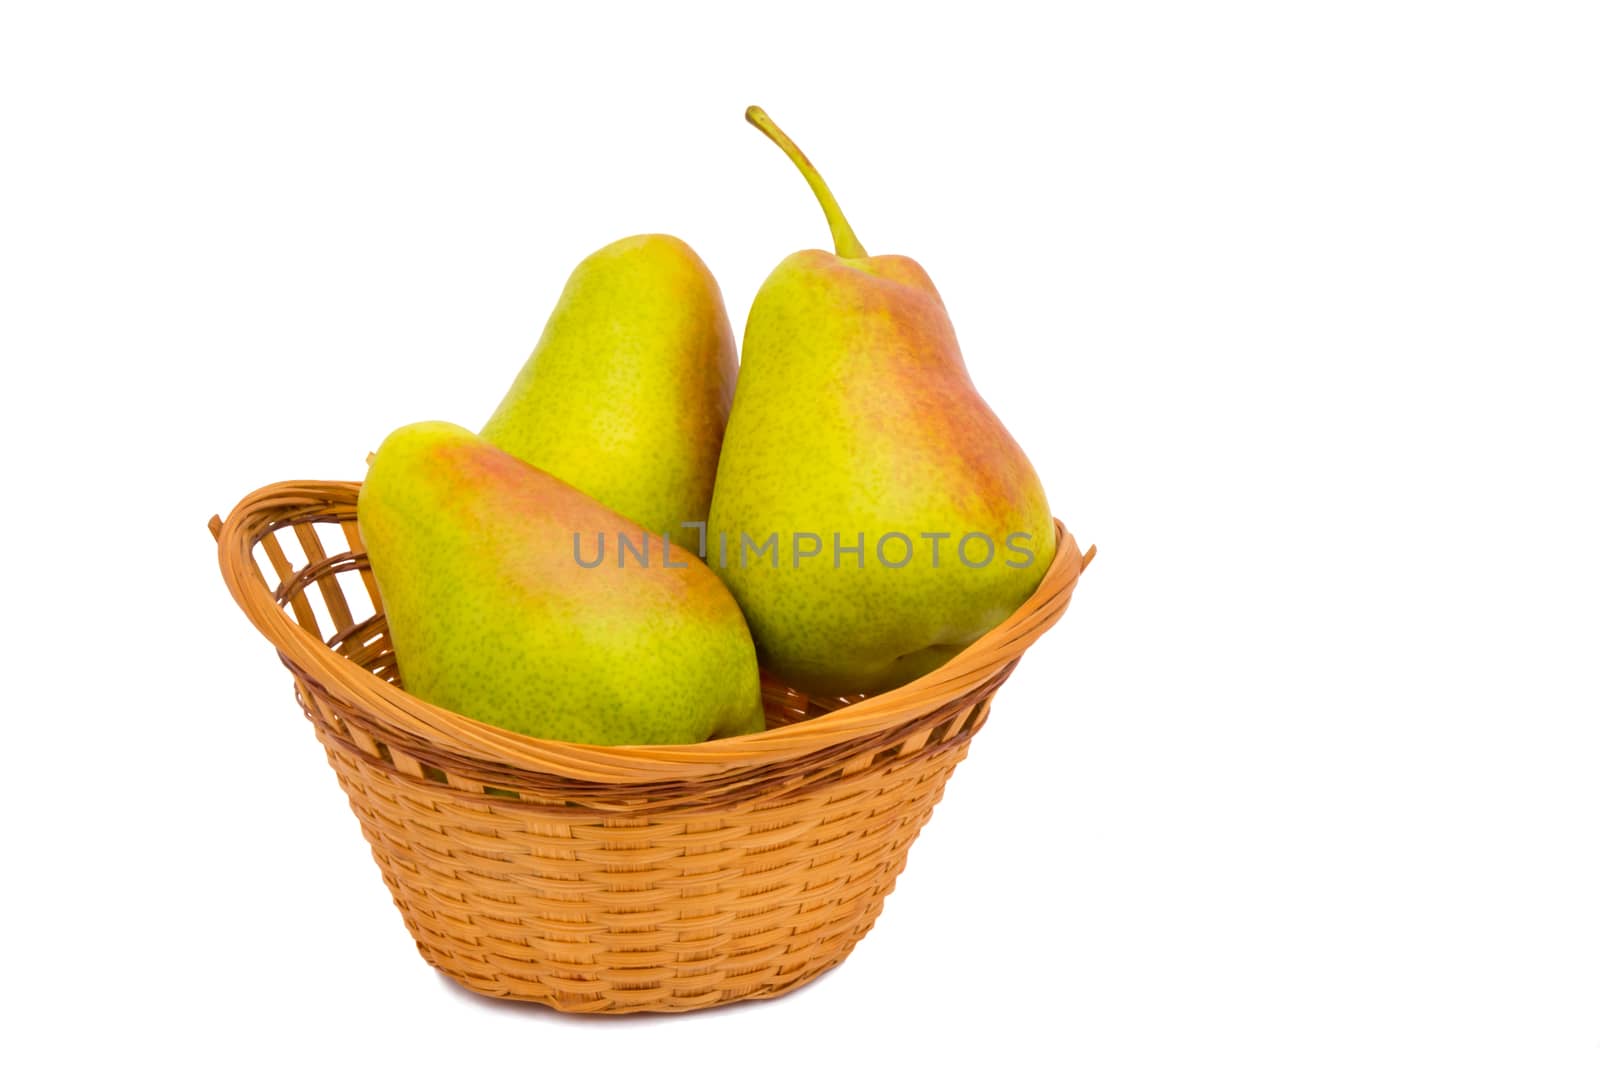 Large ripe pears in a wicker basket on a white background. by georgina198